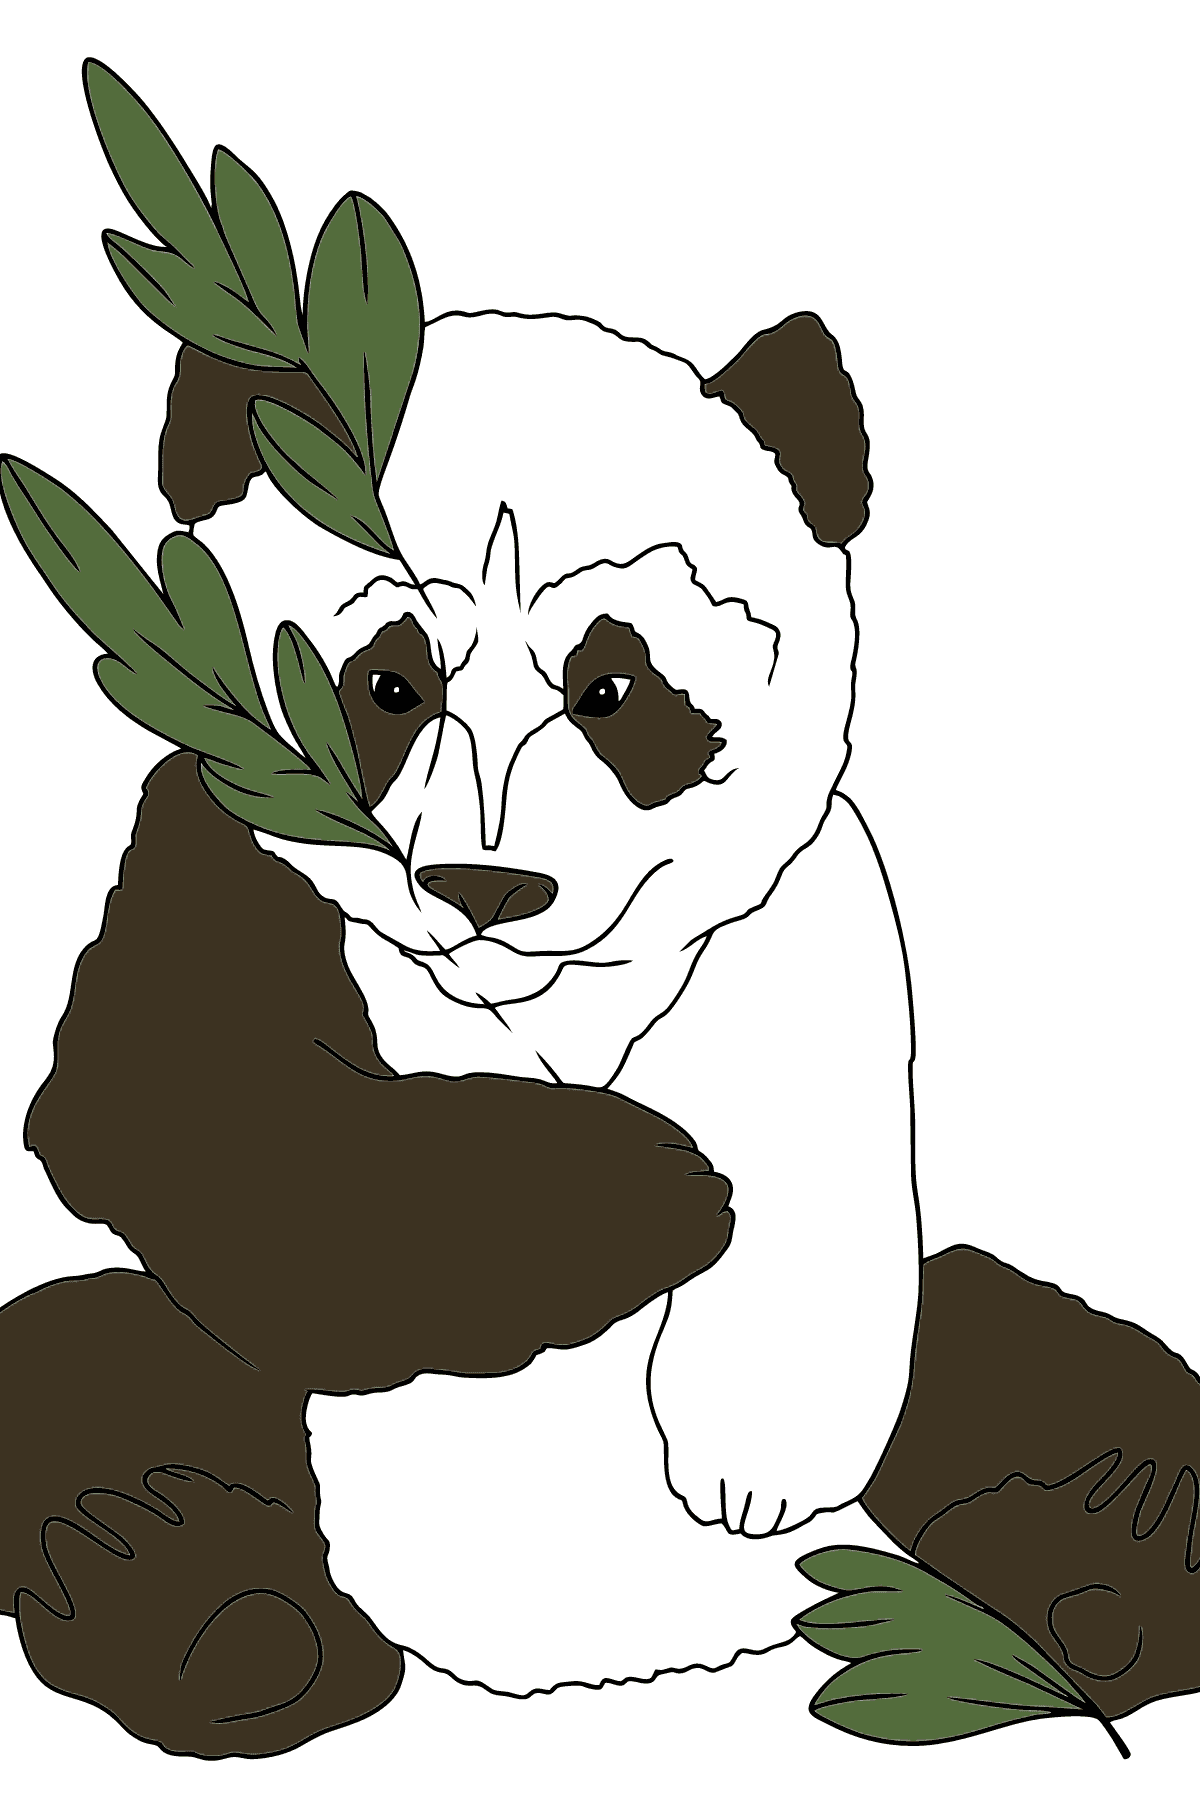 Coloring Page - A Panda is Hugging Bamboo Leaves - Coloring Pages for Kids